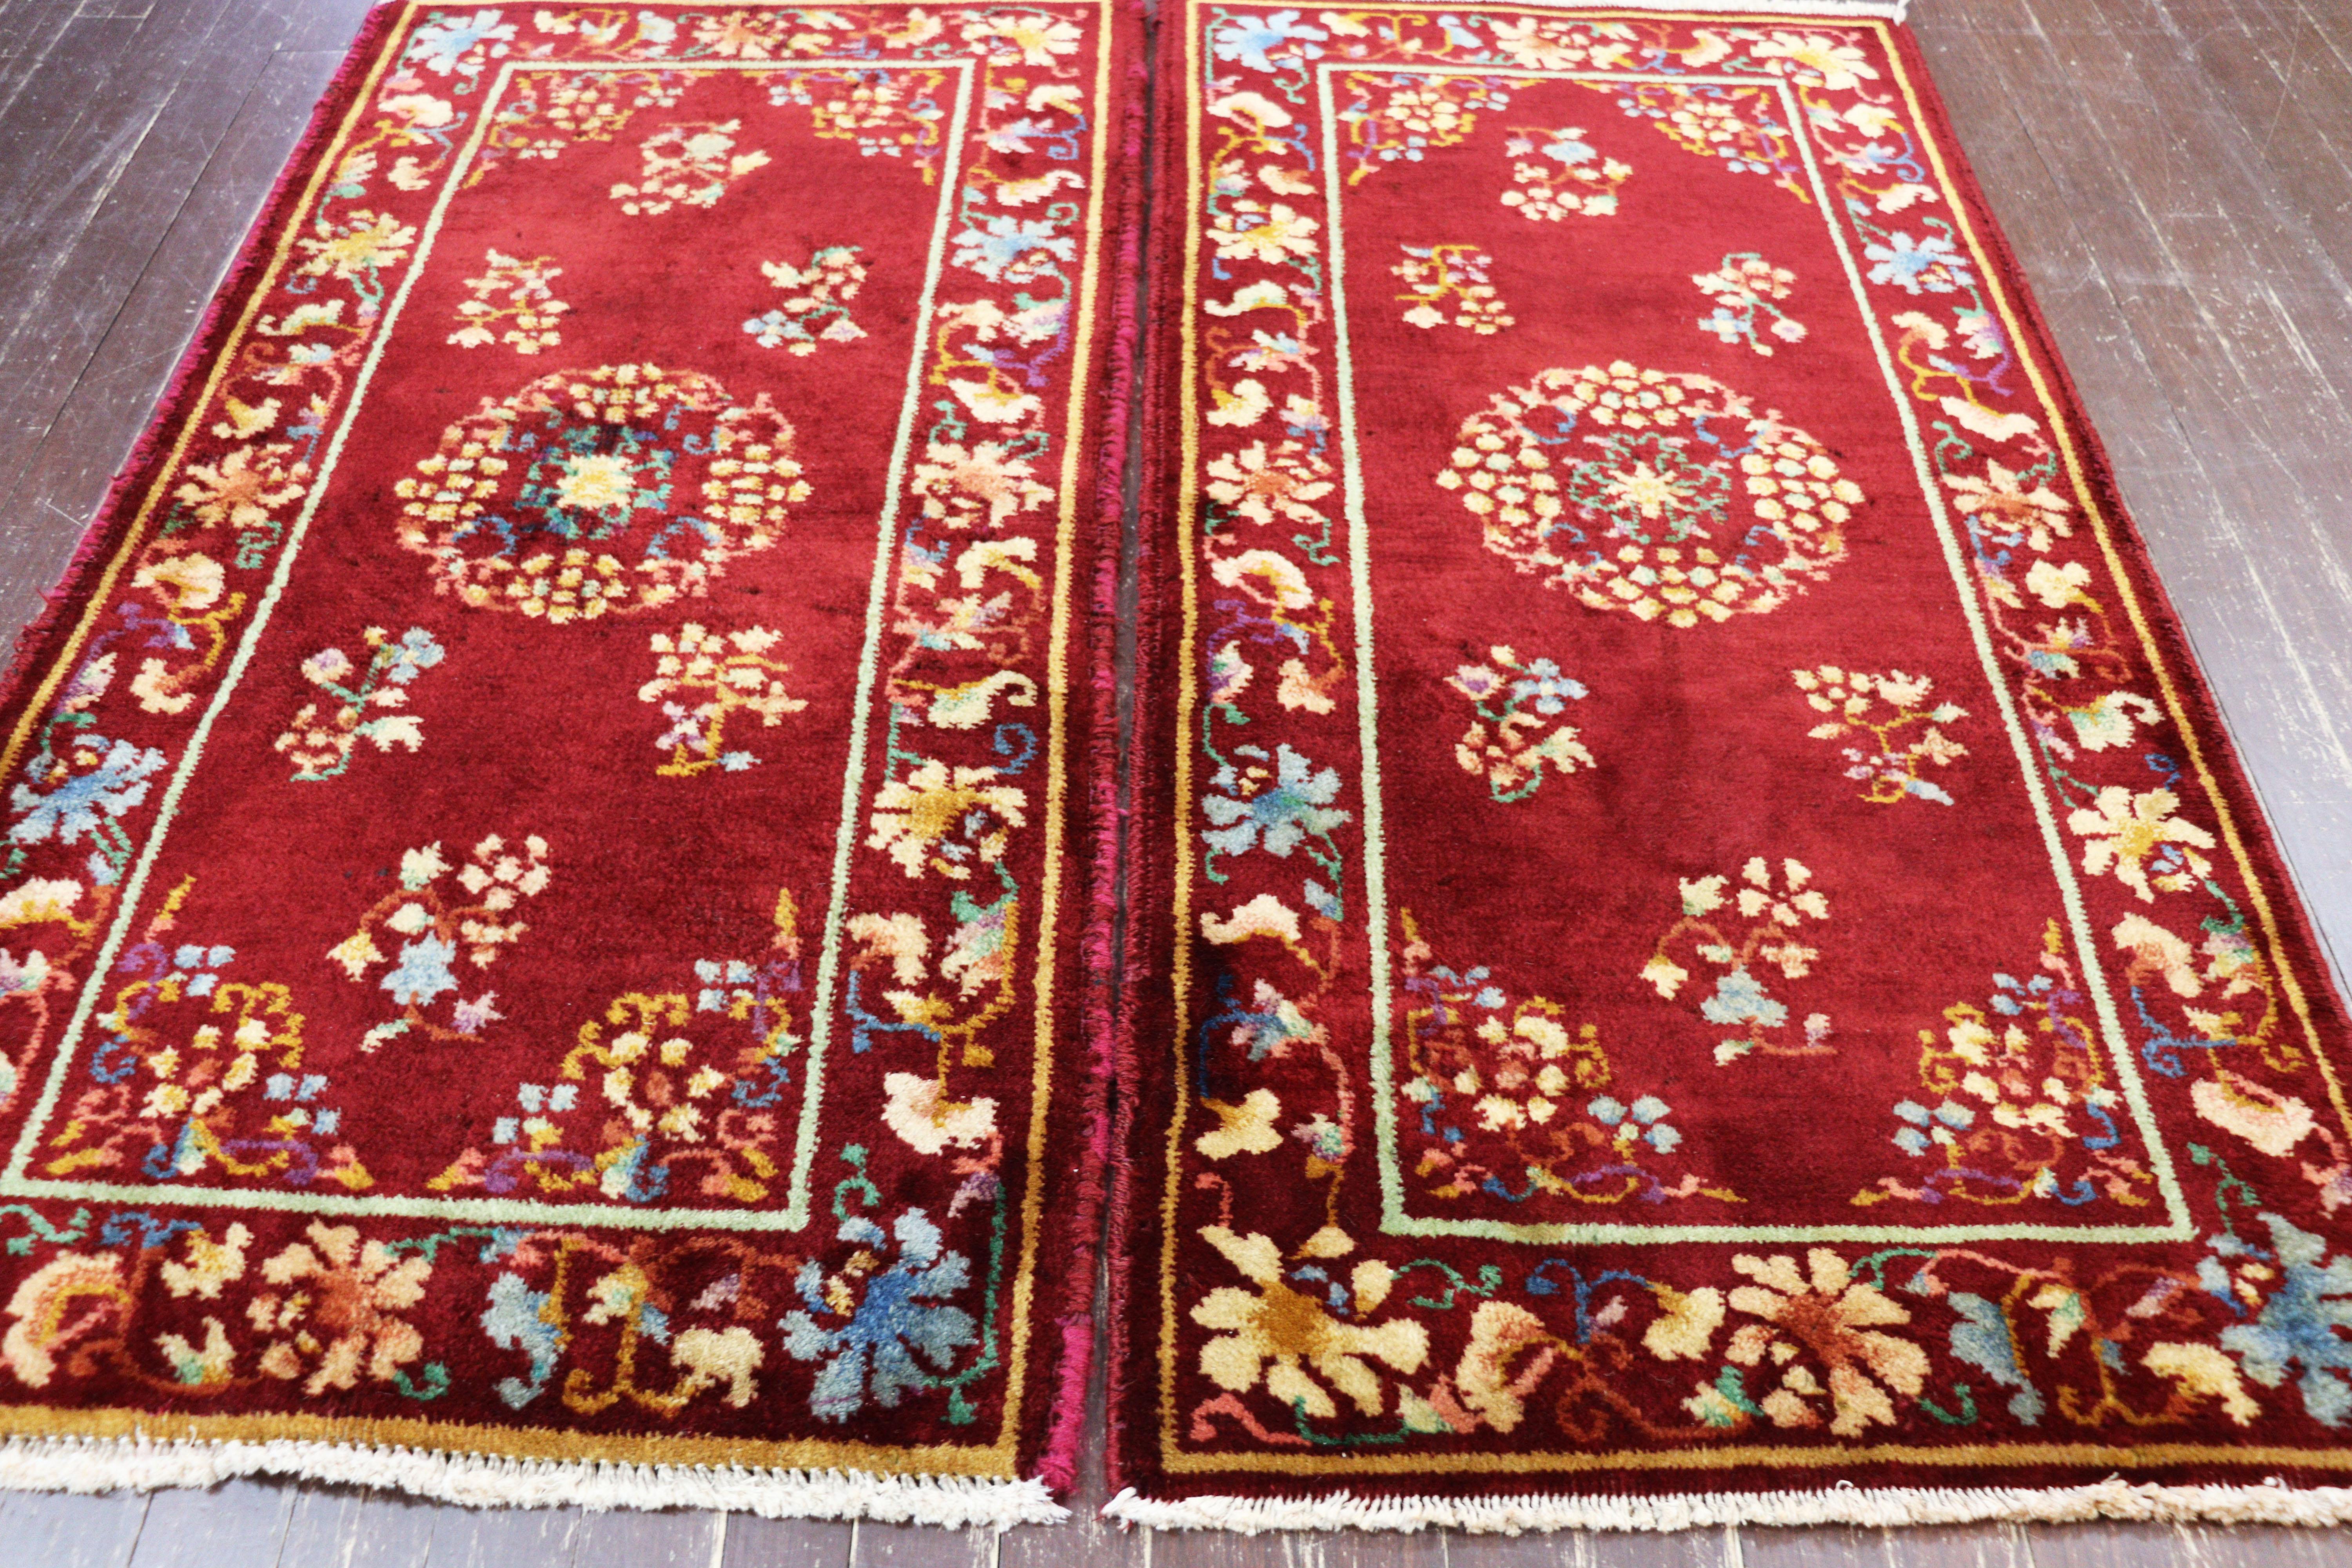 Brushed A Pair of Antique Art Deco Chinese Oriental Rug, 2' x 3'10